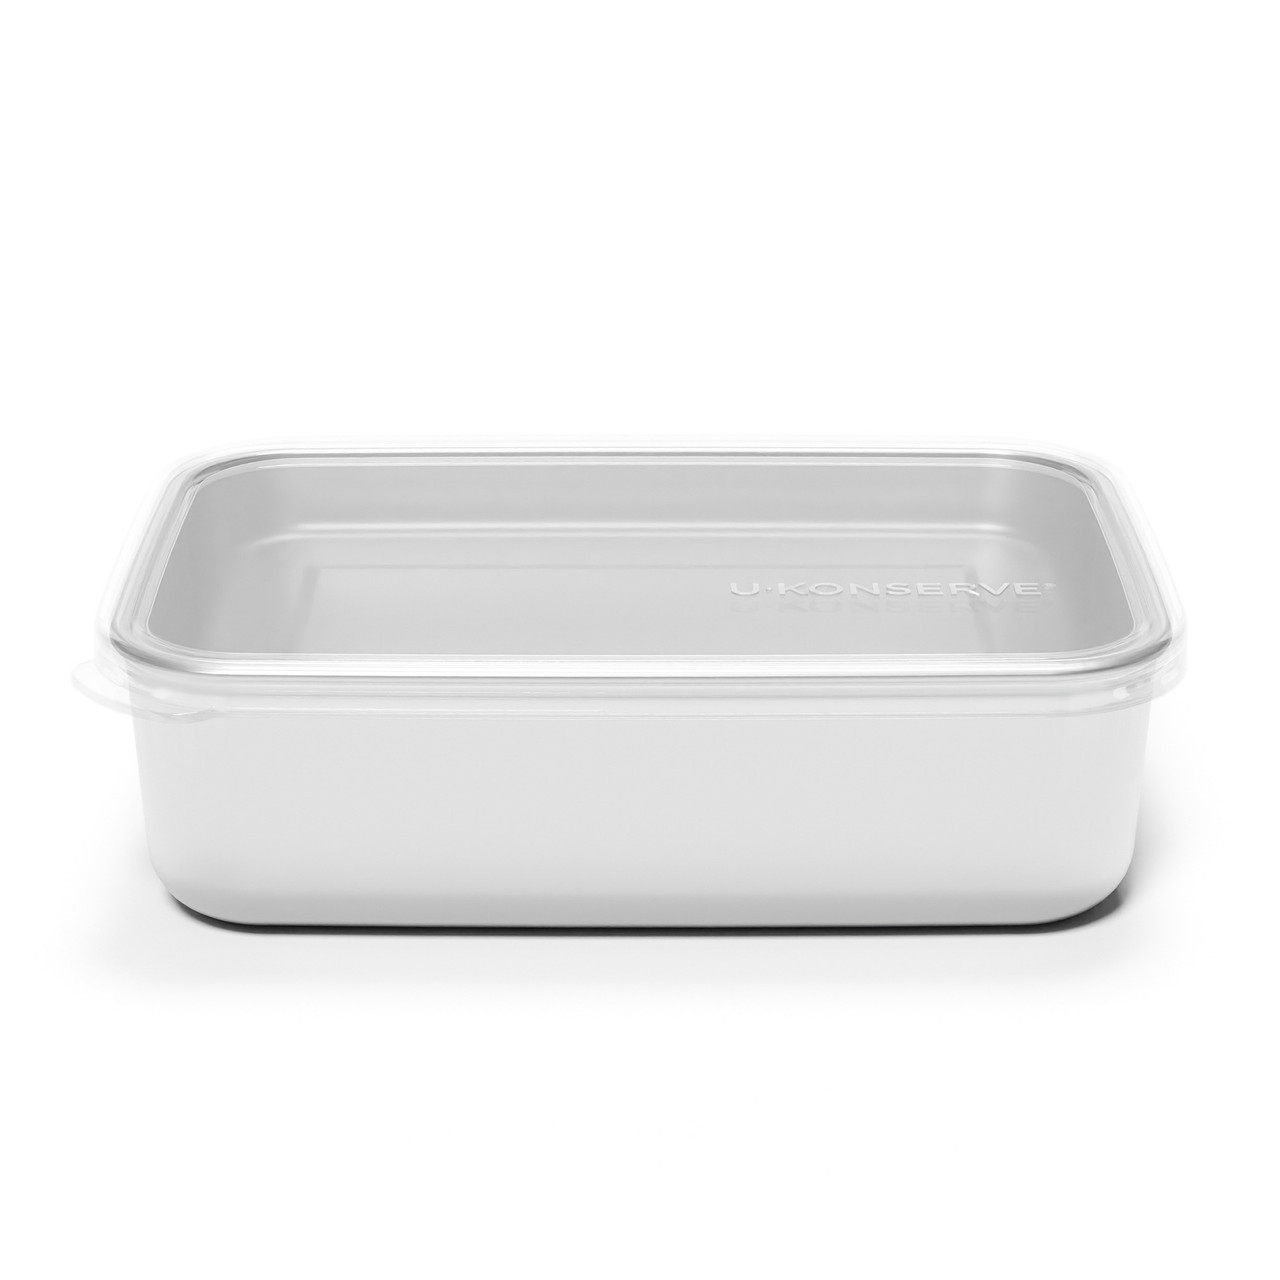 Ukonserve 45 oz Stainless Steel Food Storage Container